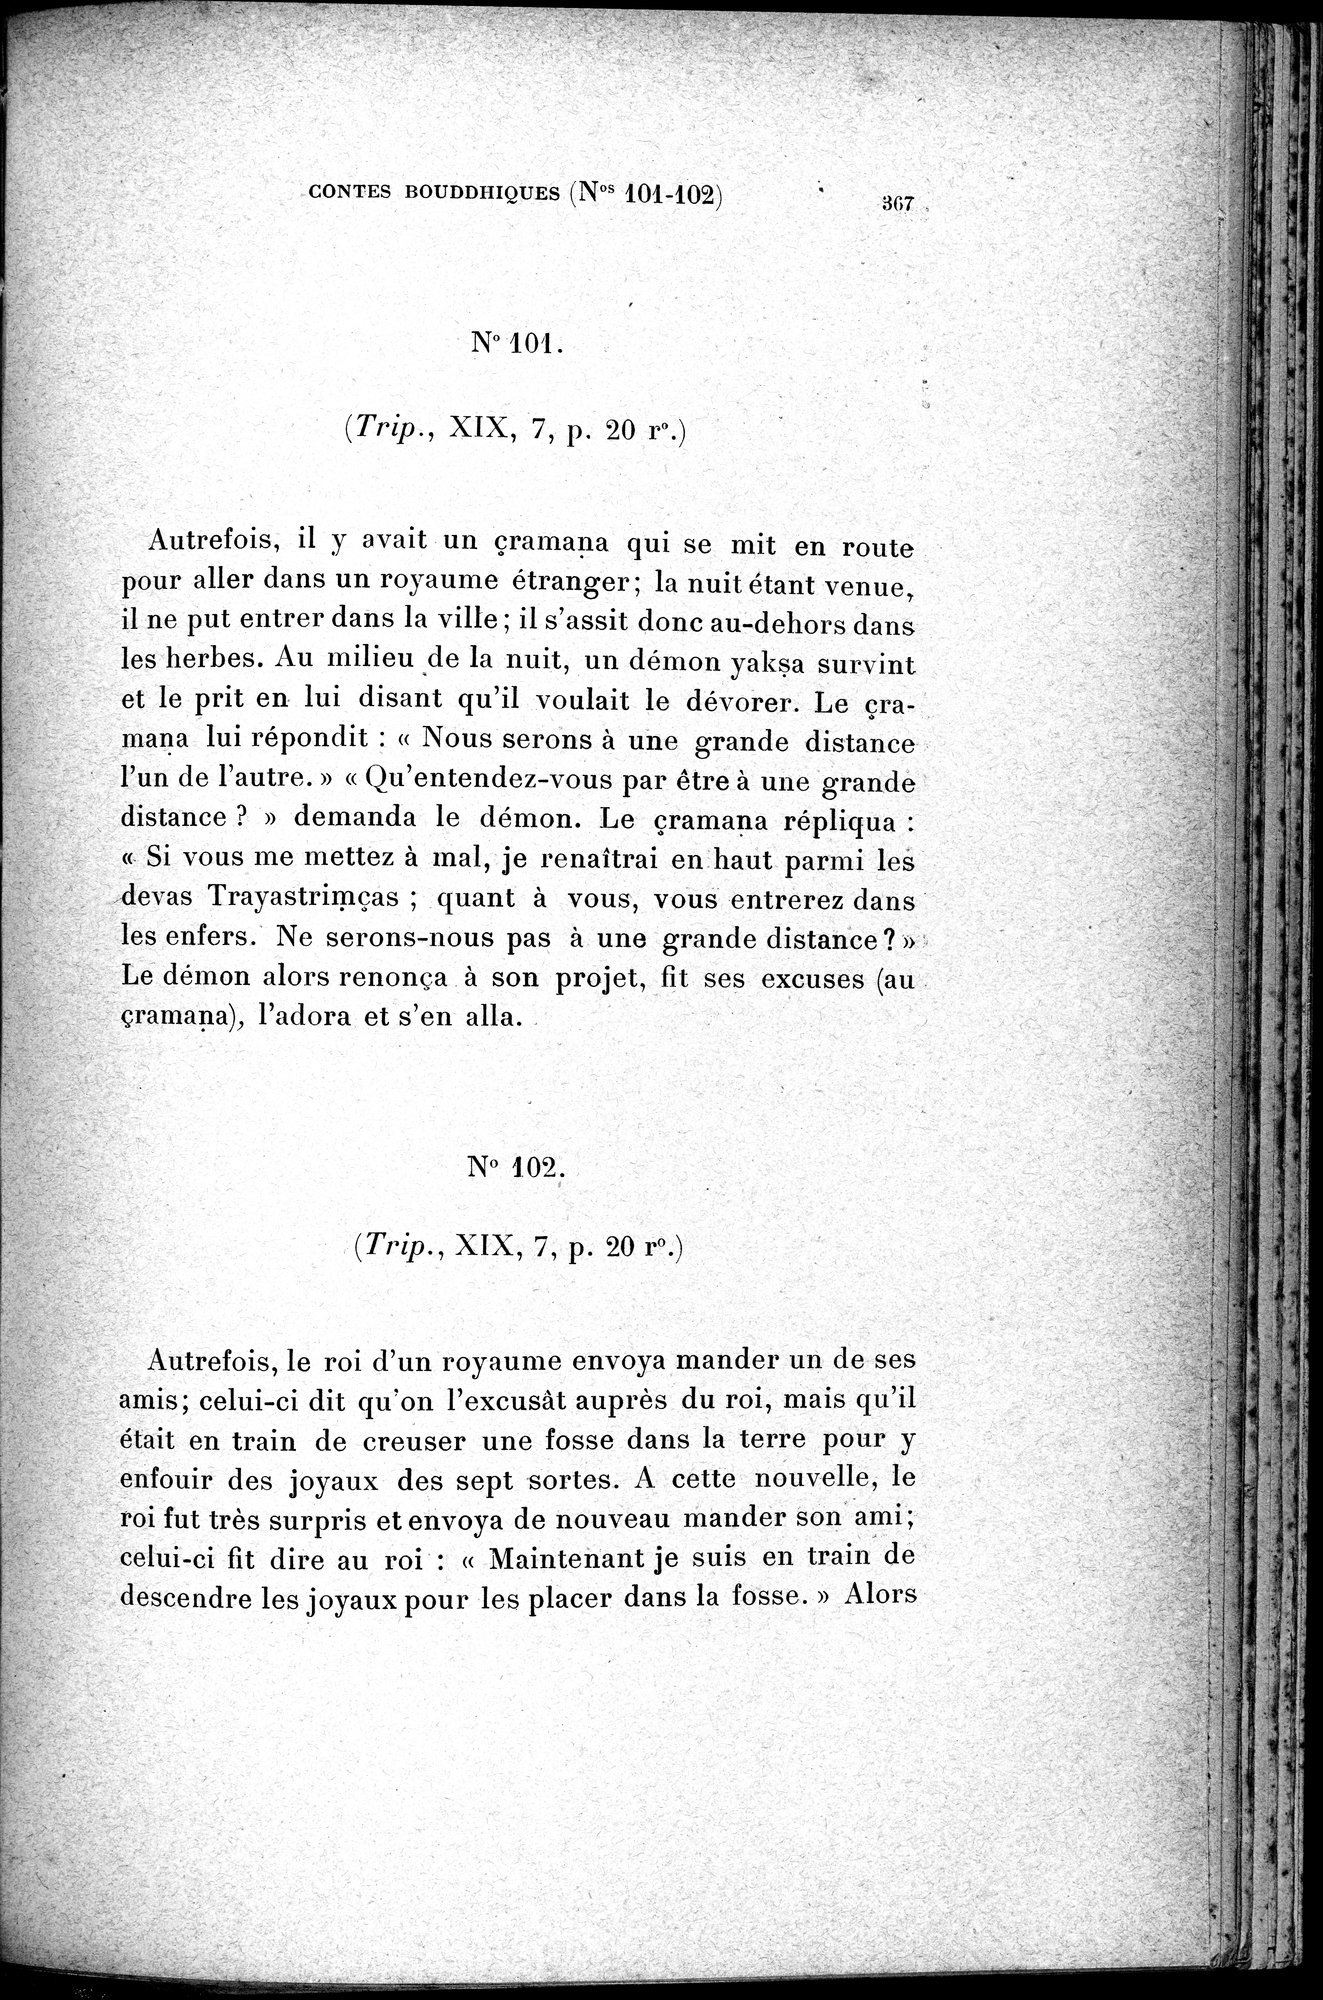 Cinq Cents Contes et Apologues : vol.1 / Page 401 (Grayscale High Resolution Image)